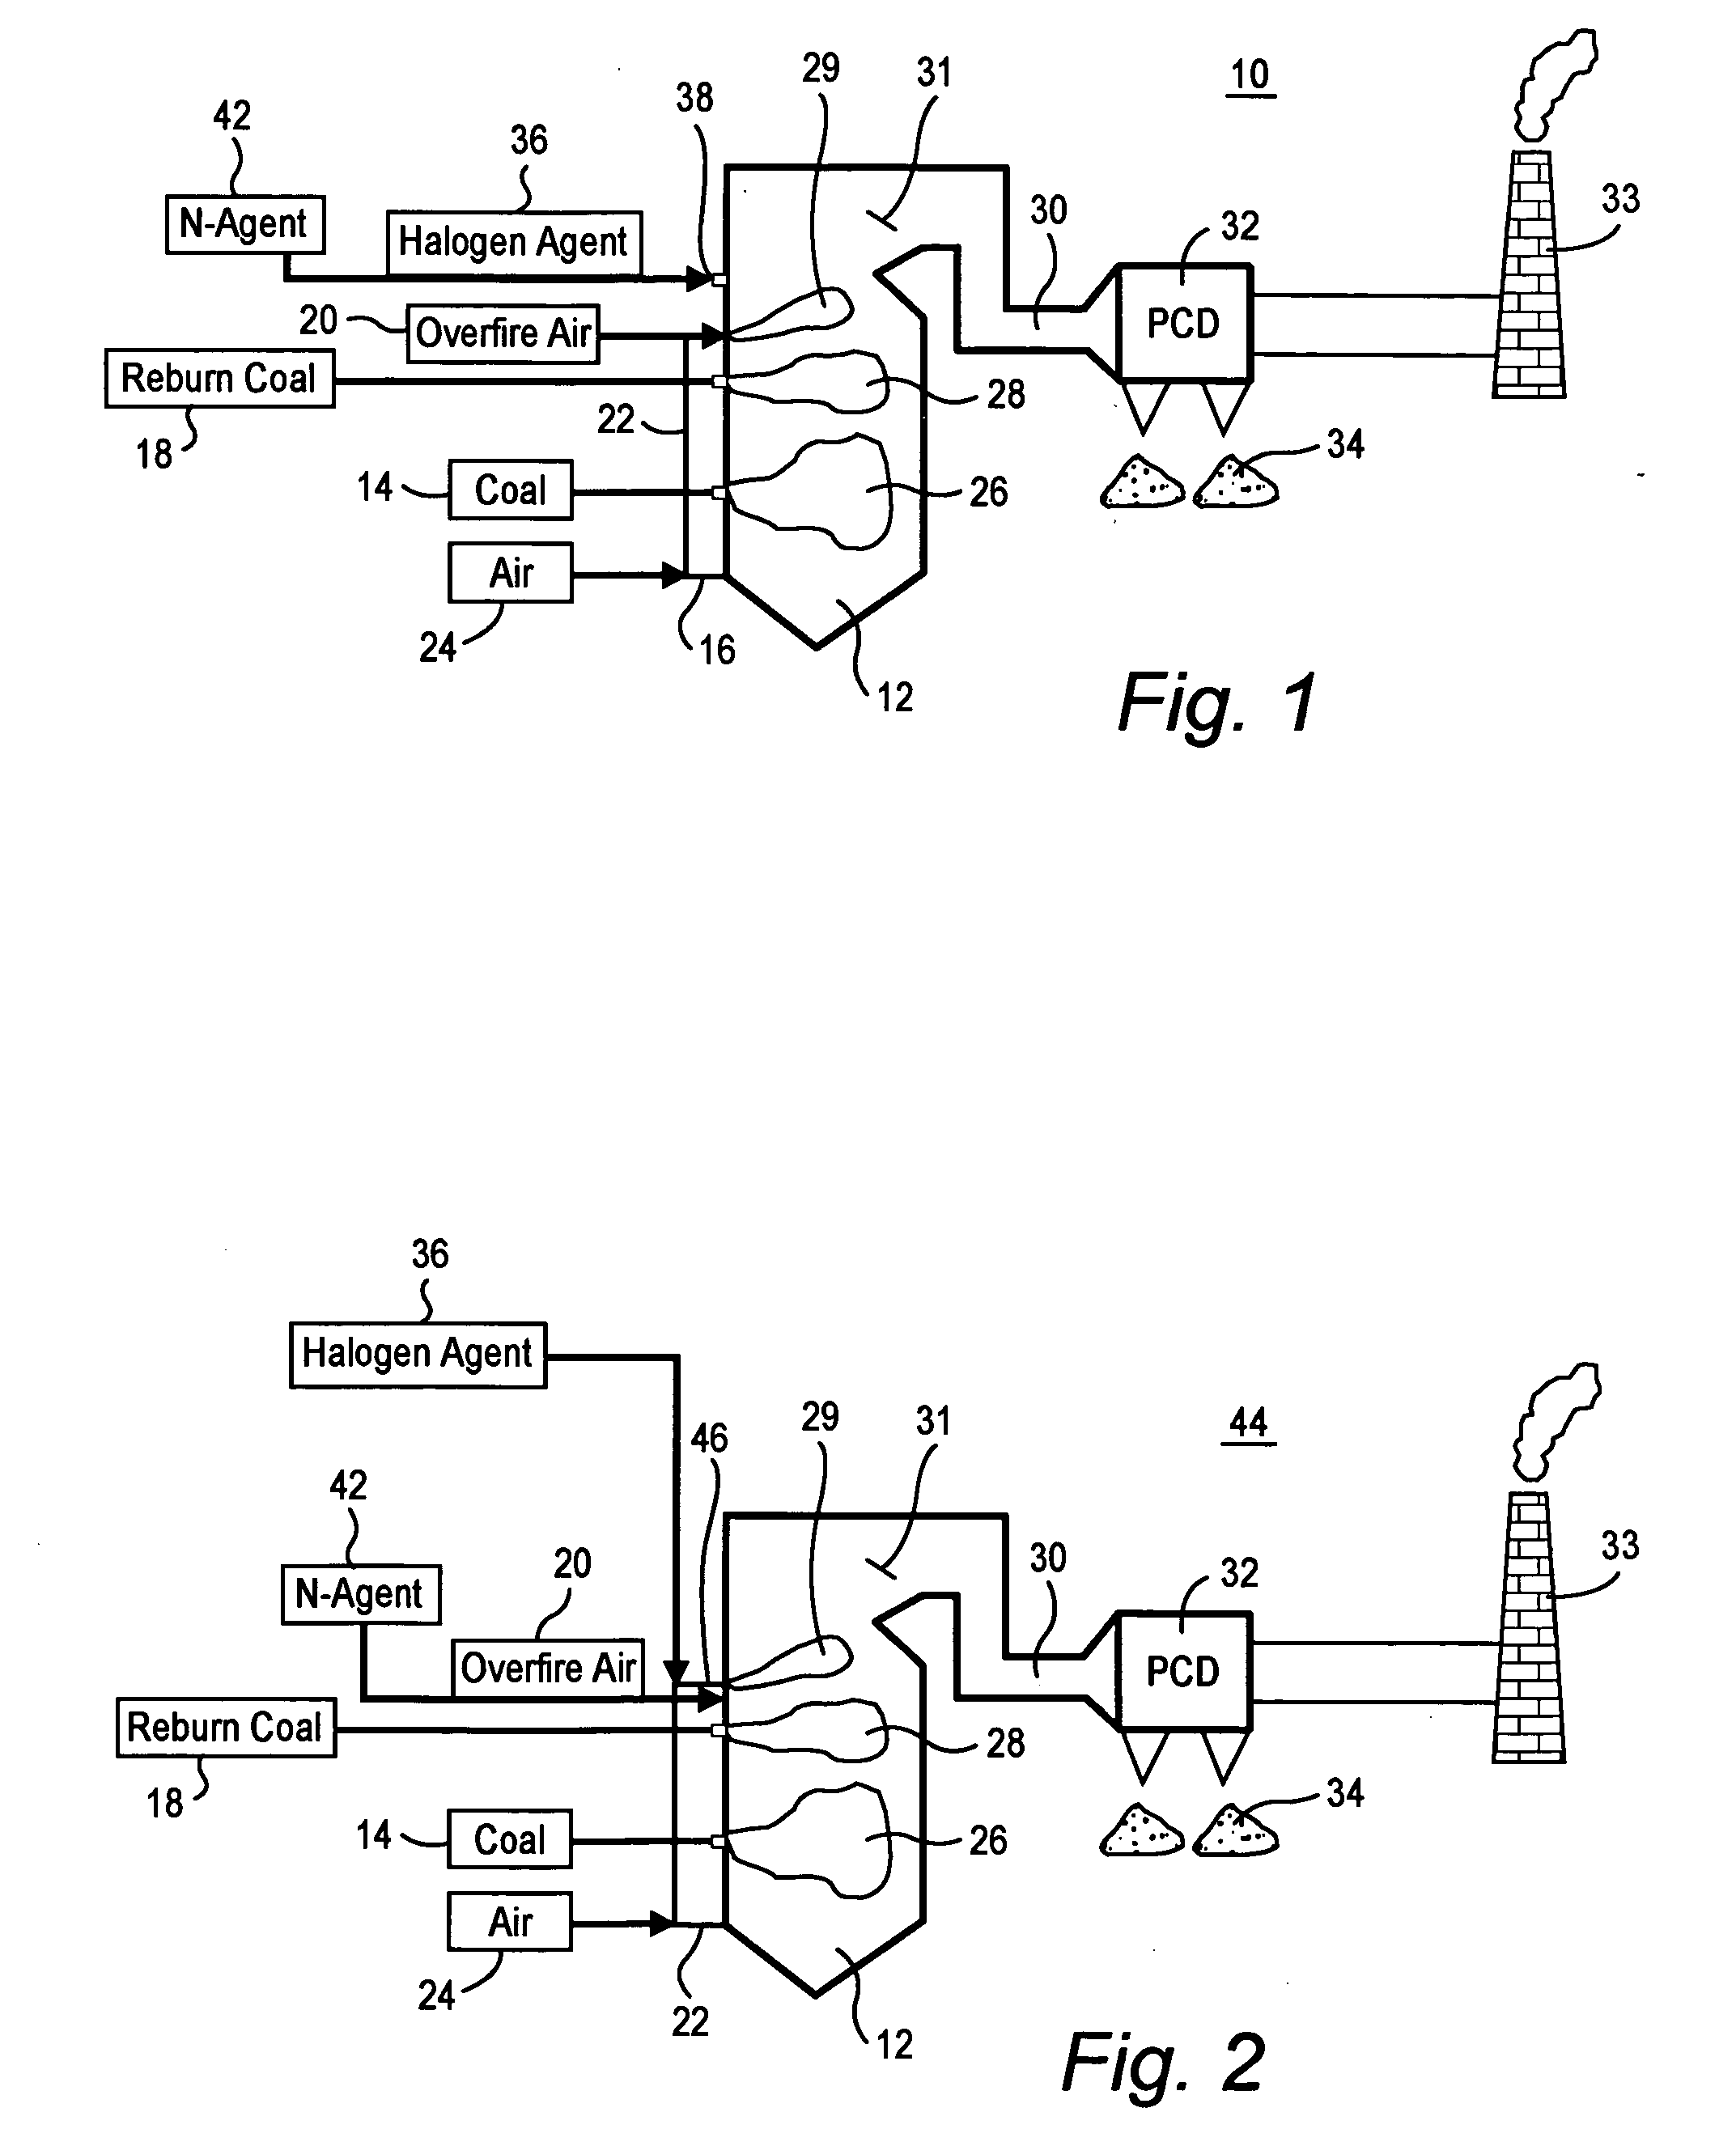 Method and system for removal of NOx and mercury emissions from coal combustion